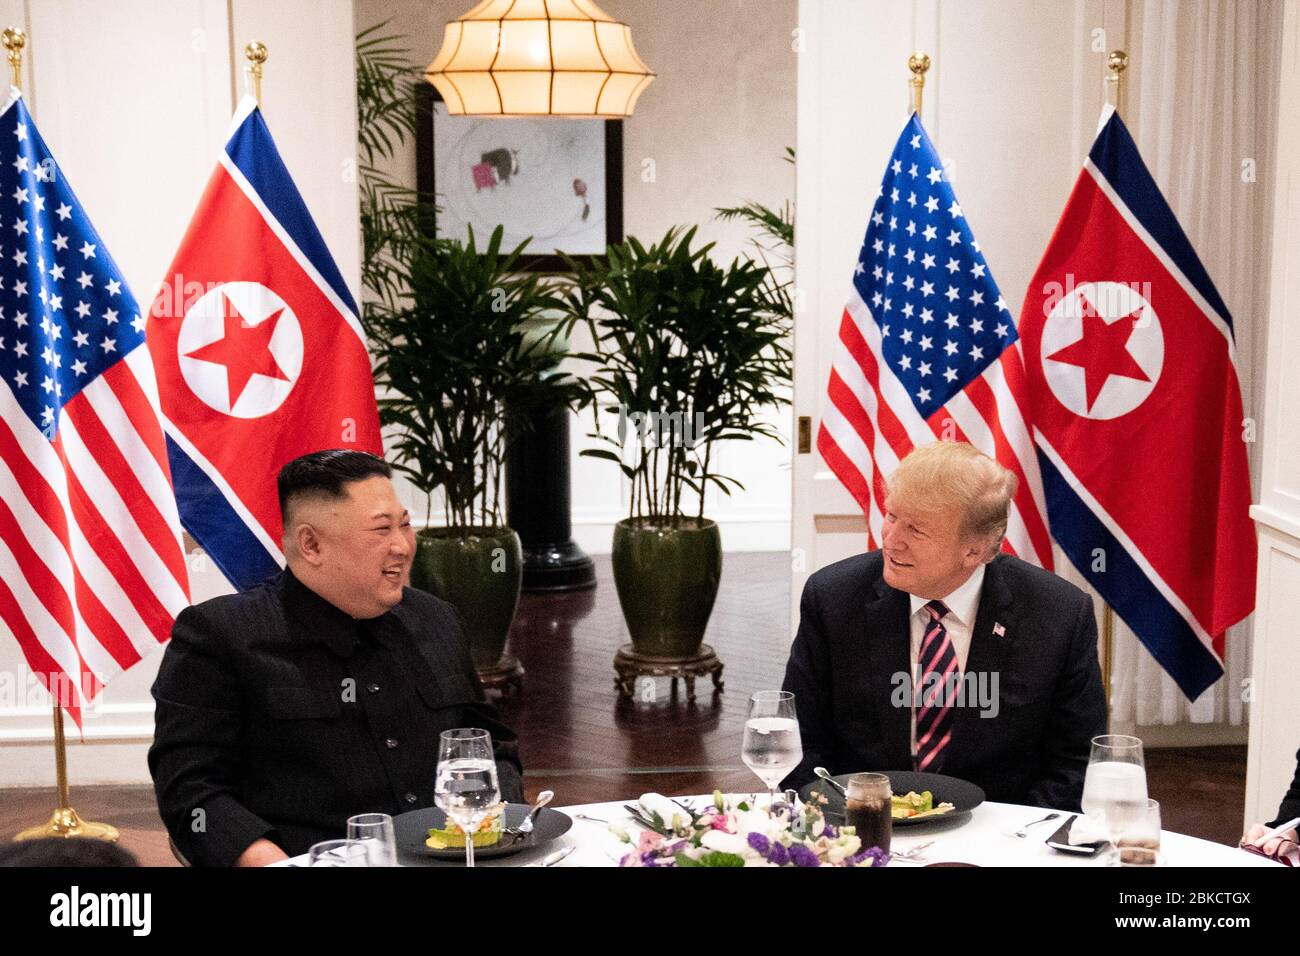 President Donald J. Trump and Kim Jong Un, Chairman of the State Affairs Commission of the Democratic People’s Republic of Korea meet for a social dinner Wednesday, Feb. 27, 2019, at the Sofitel Legend Metropole hotel in Hanoi, for their second summit meeting. President Trump's Trip to Vietnam Stock Photo